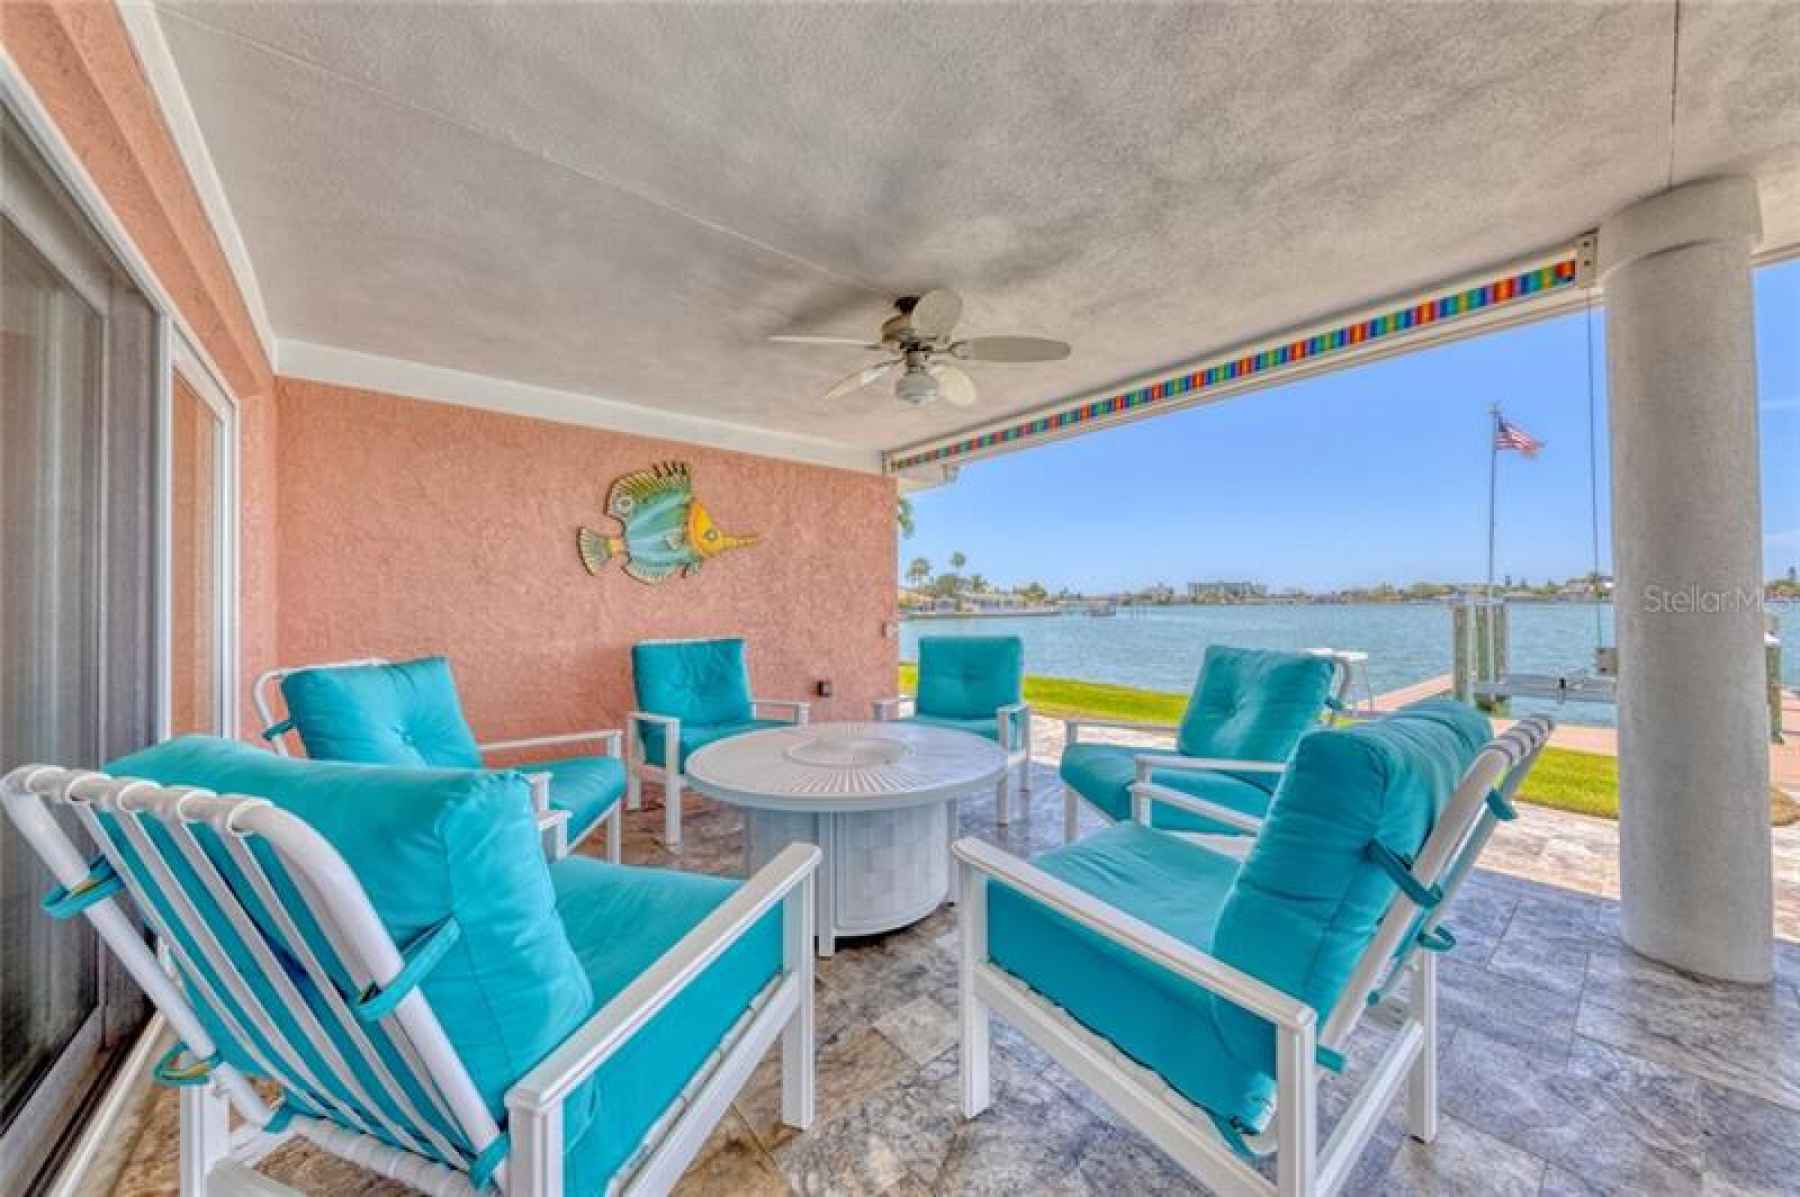 Covered entertainment lanai with a colorful pull-down shade.